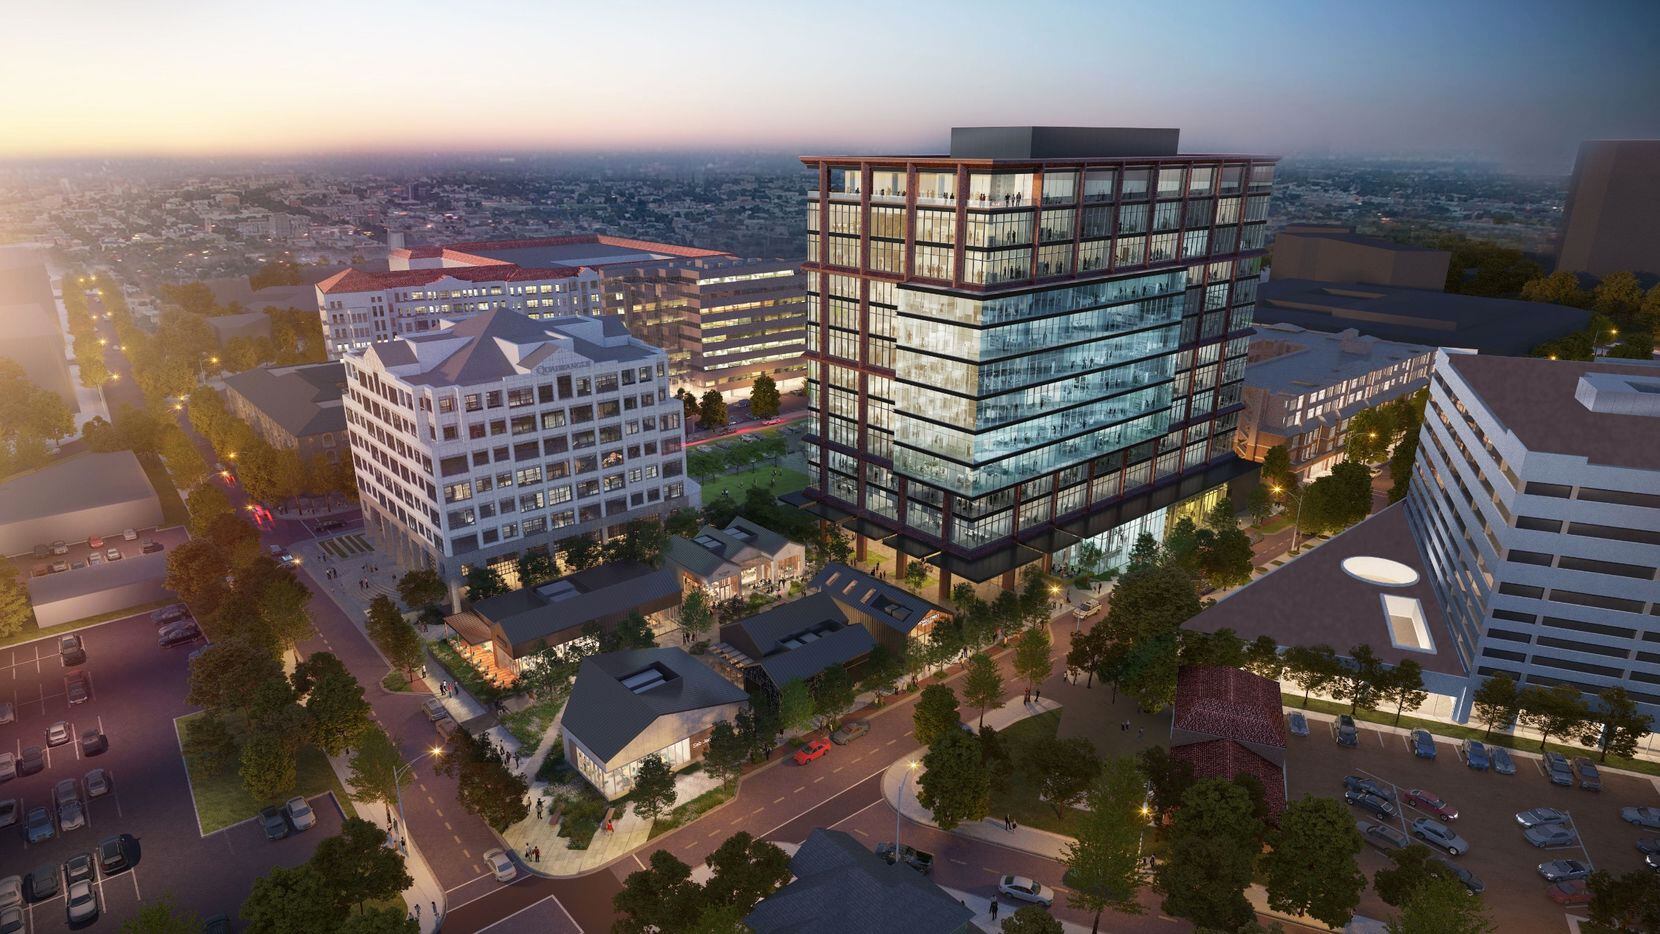 Construction has started on the Quadrangle redevelopment in Uptown Dallas which includes a...